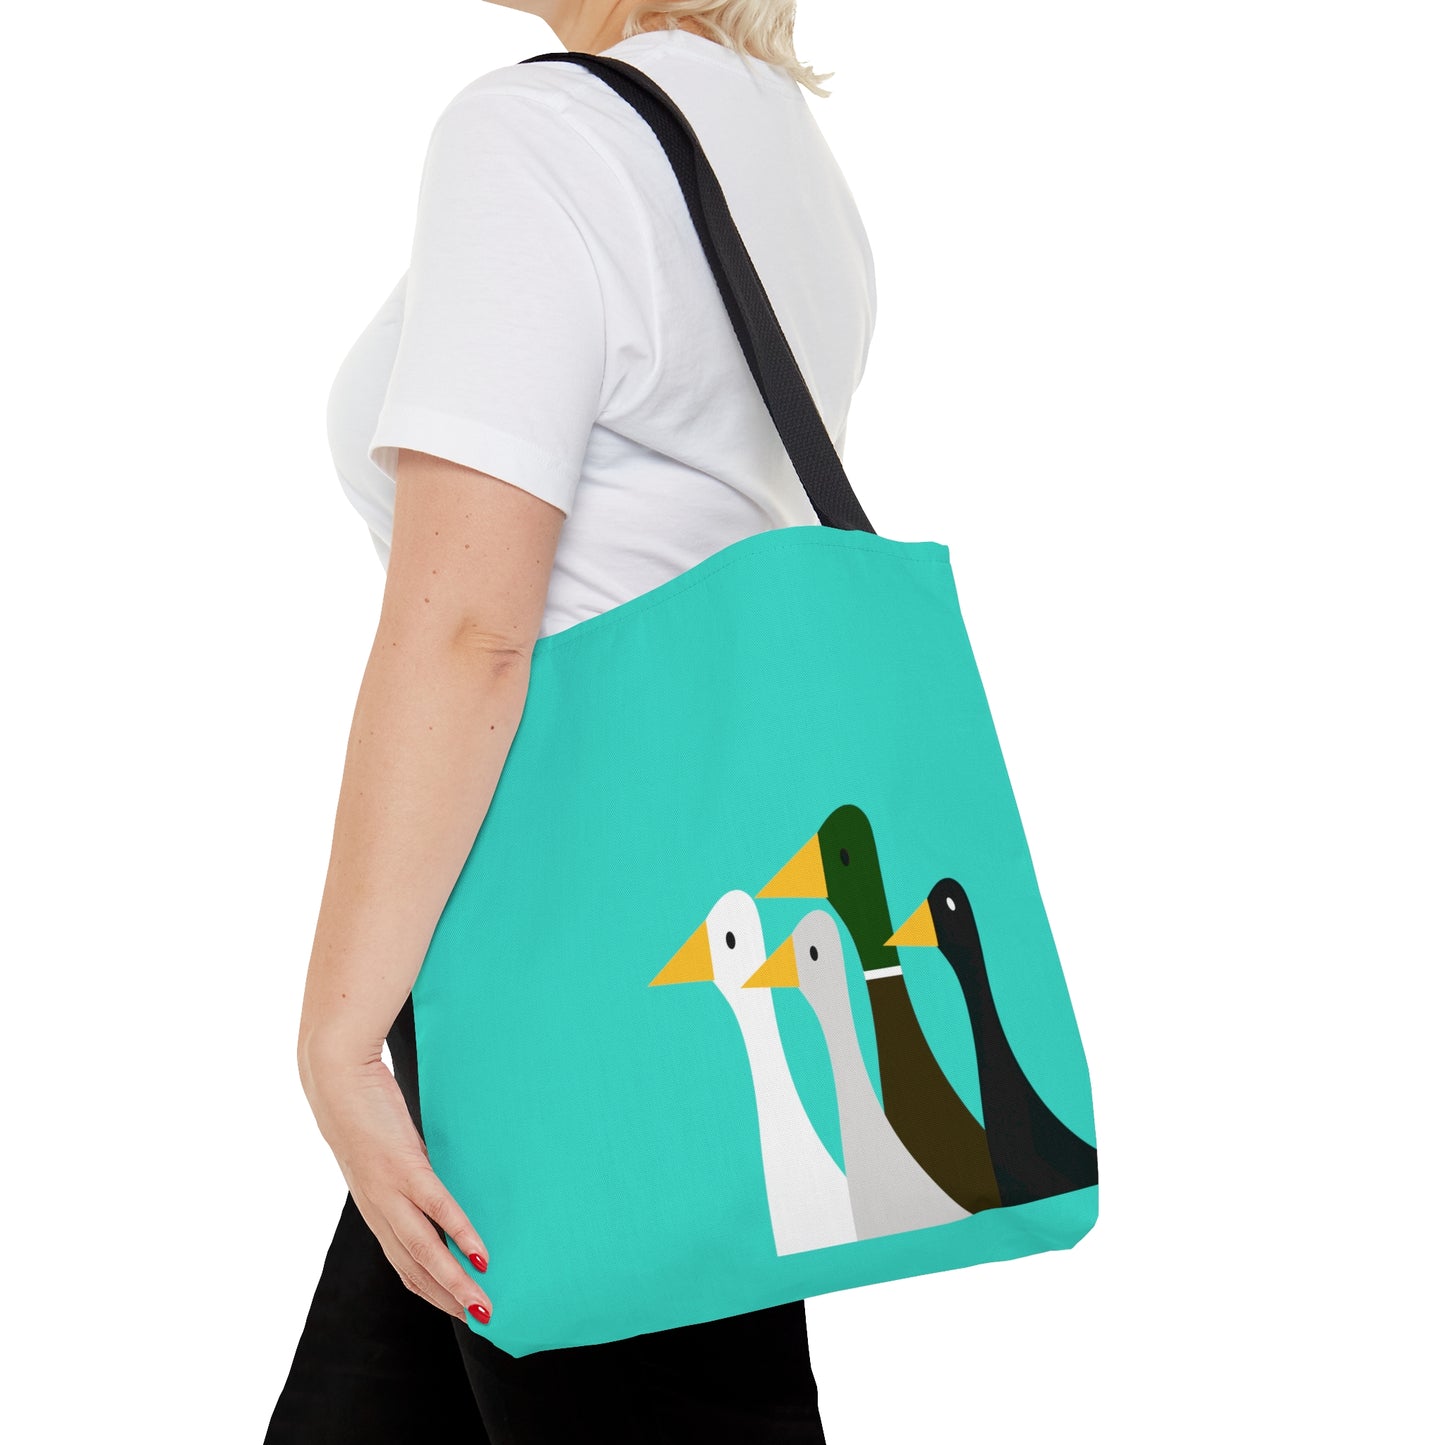 Take the ducks with you - turquoise - Tote Bag